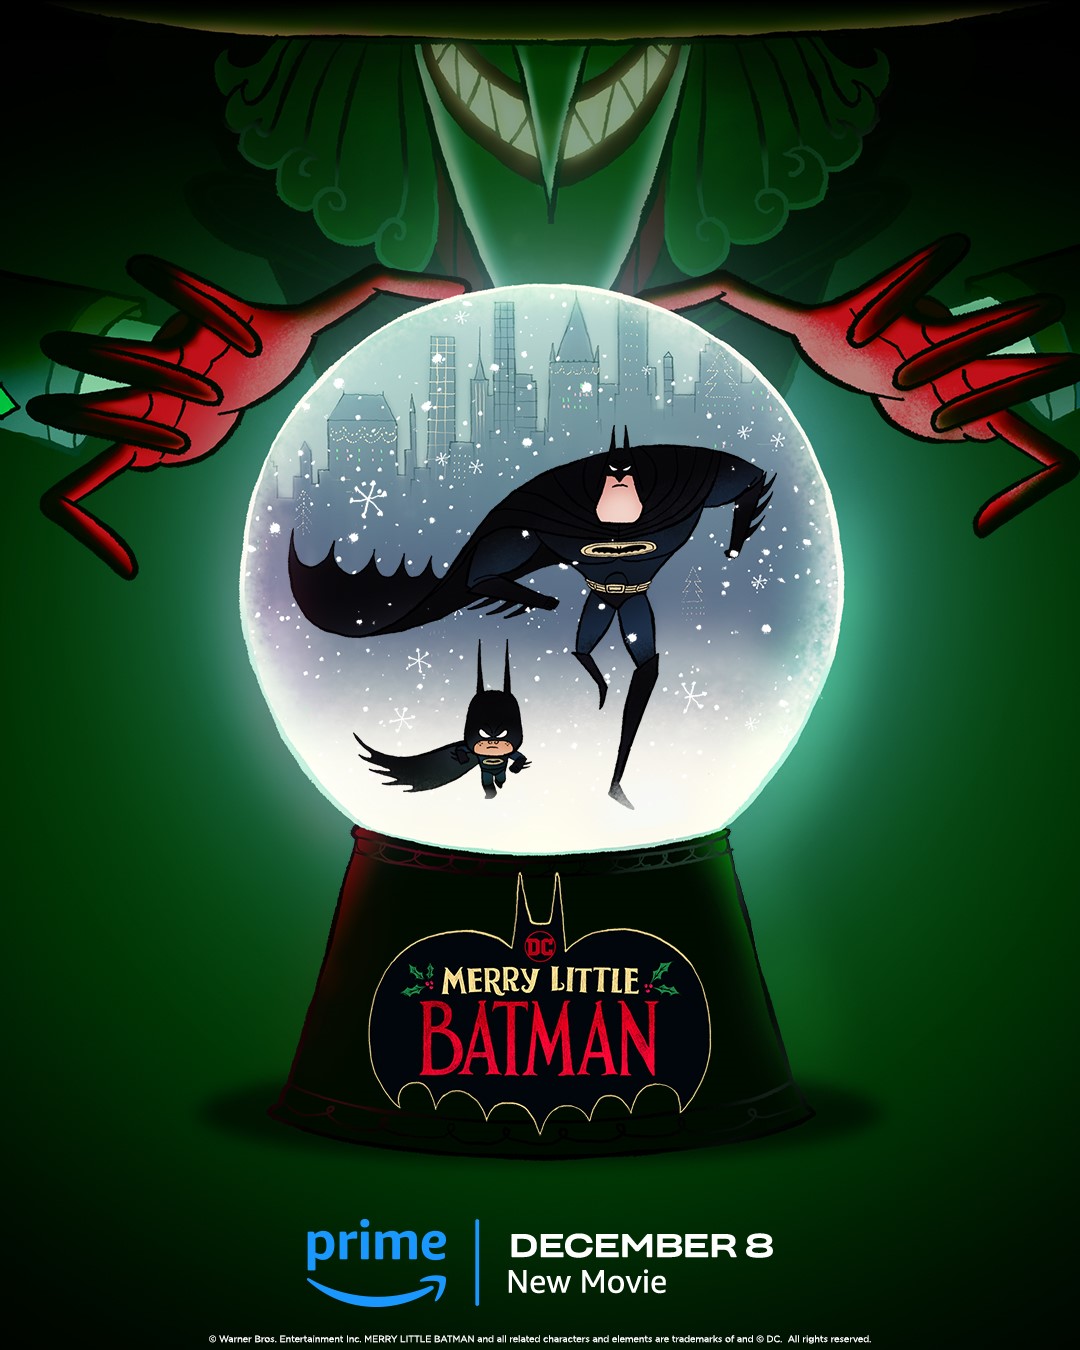 Merry Little Batman review: It’s all for you Damian